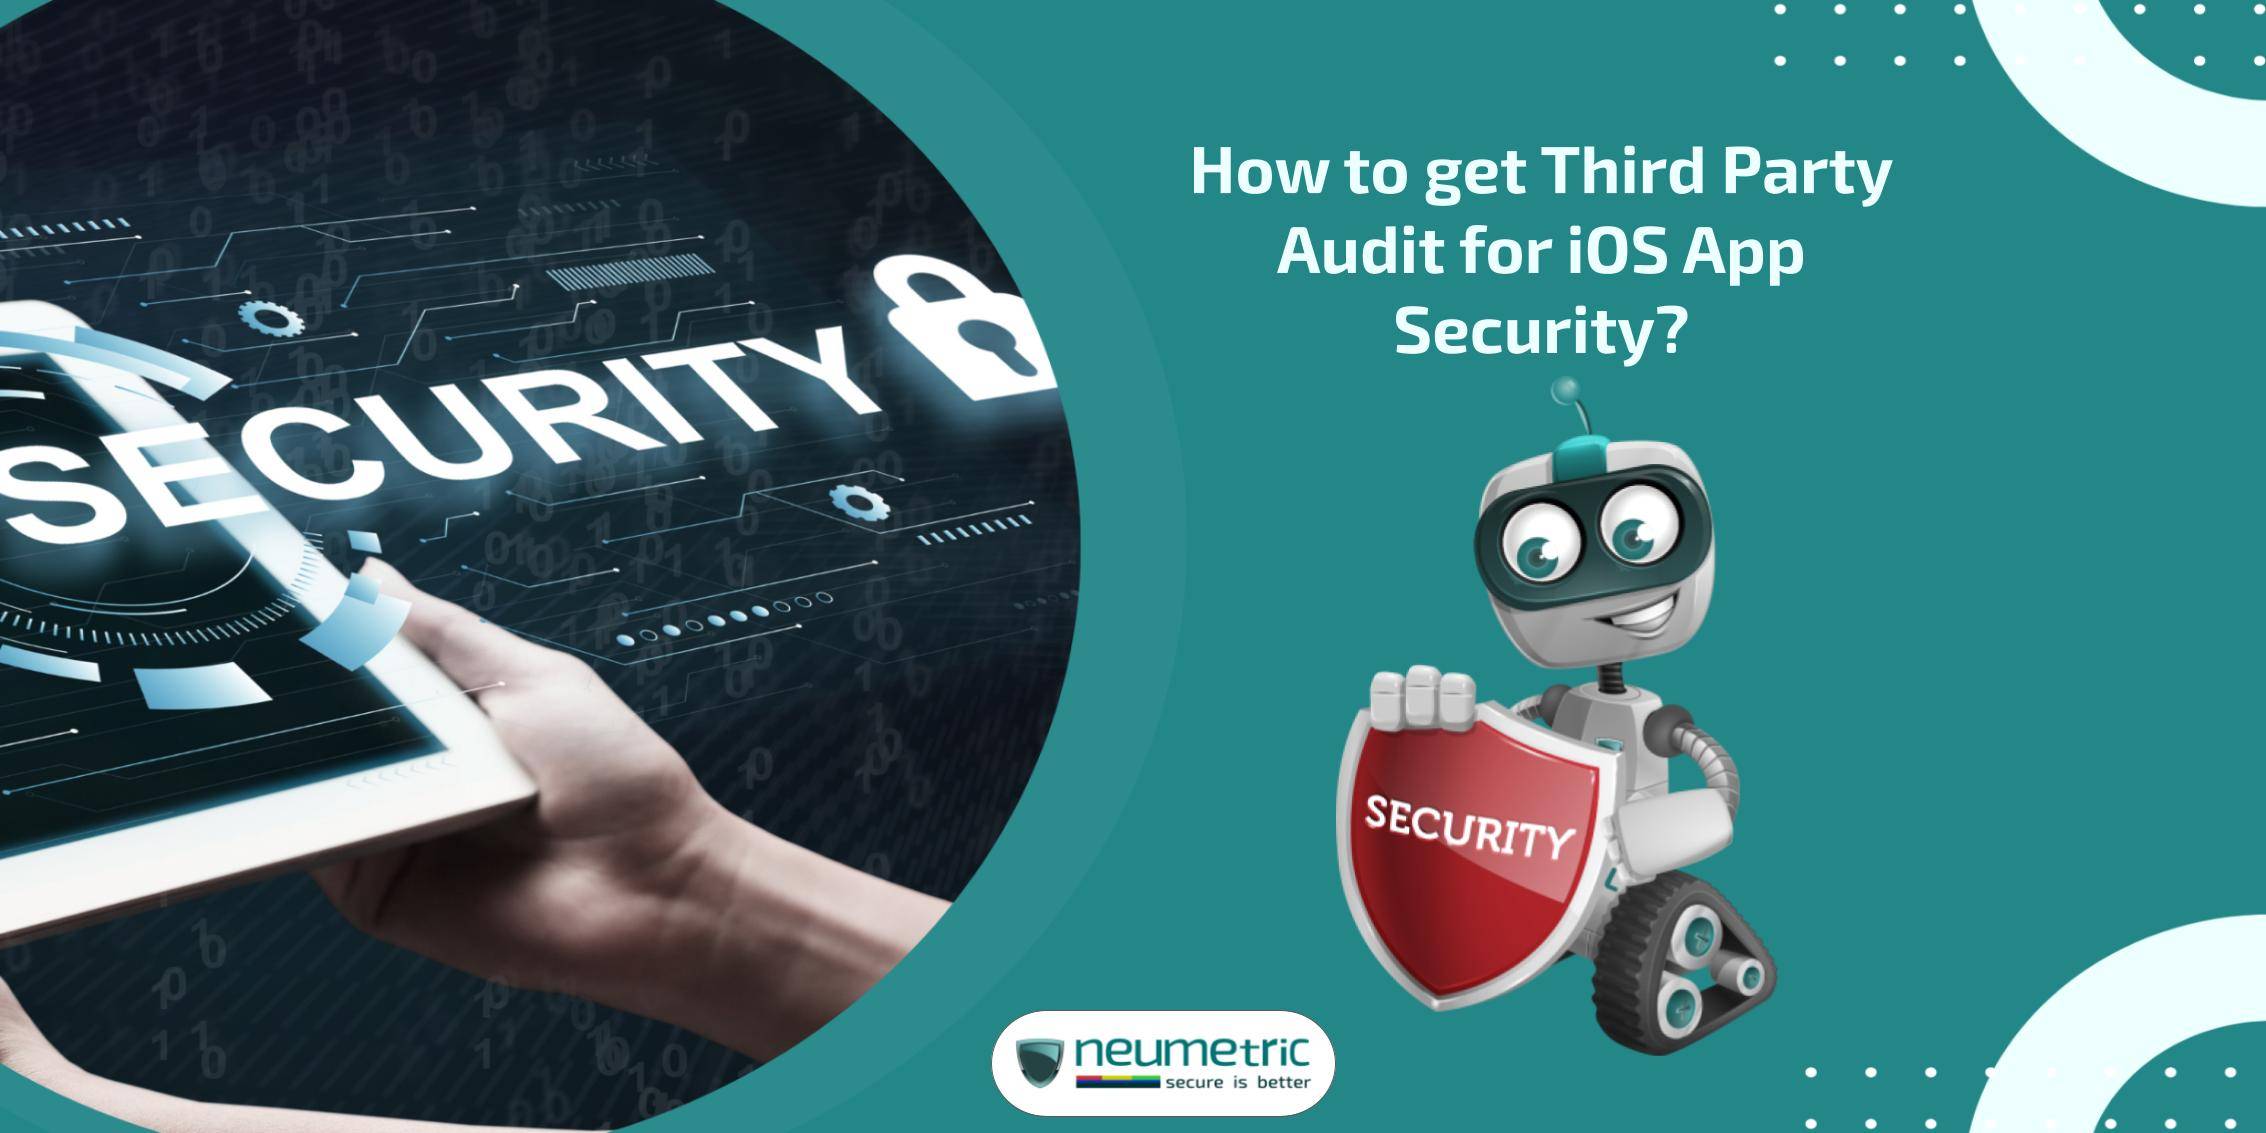 How to get Third Party Audit for iOS App Security?